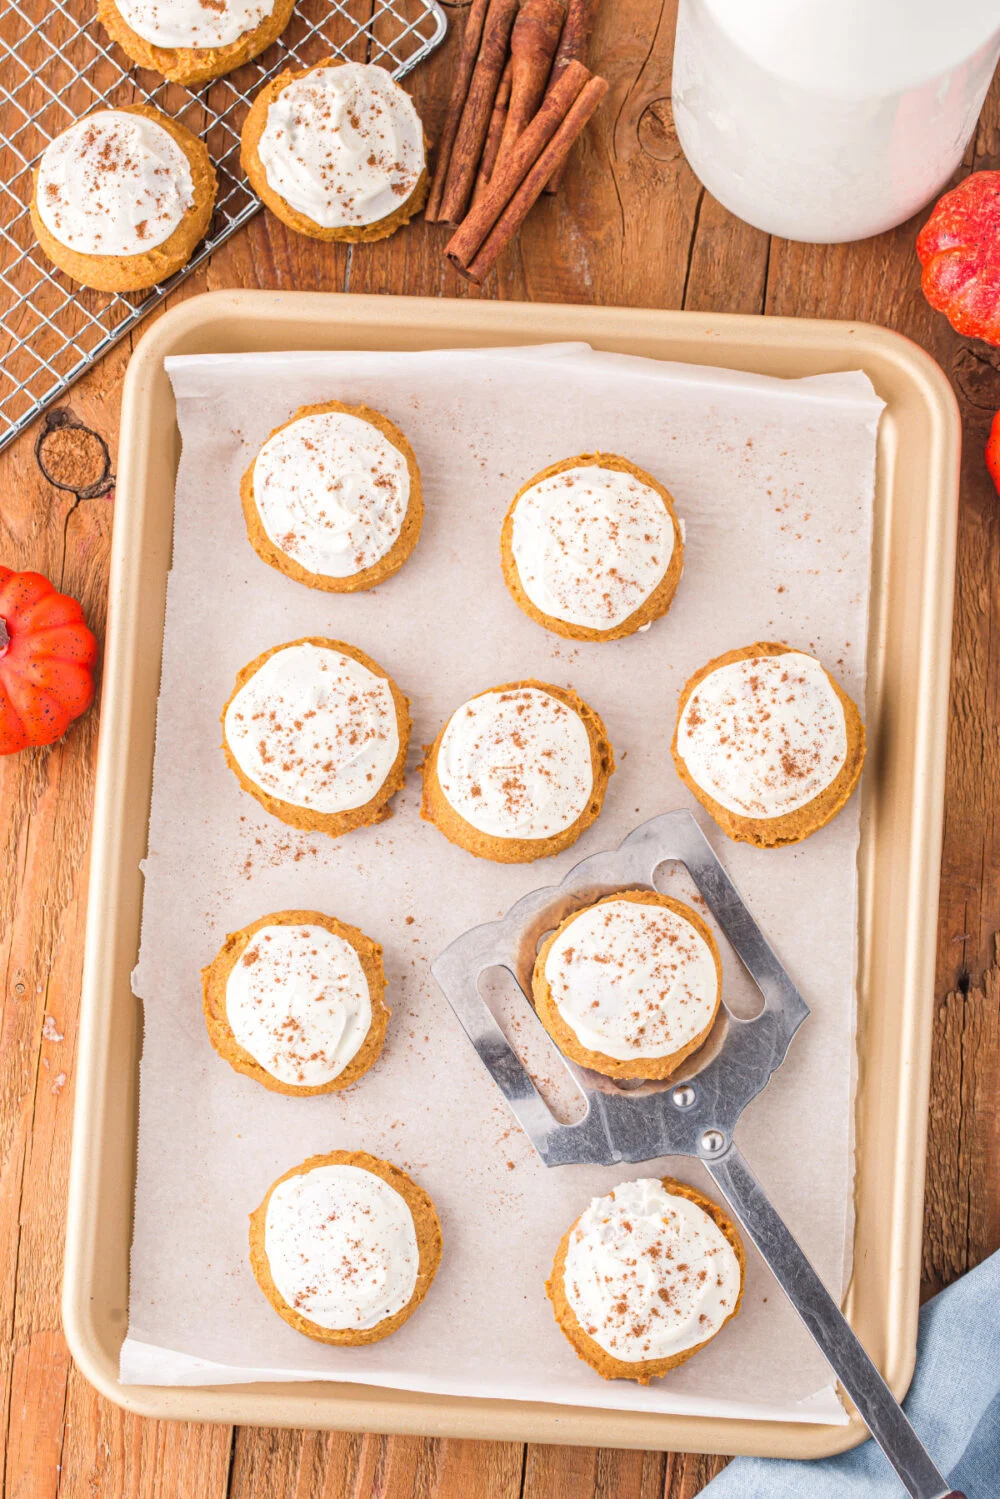 Iced cookies on a baking sheet.